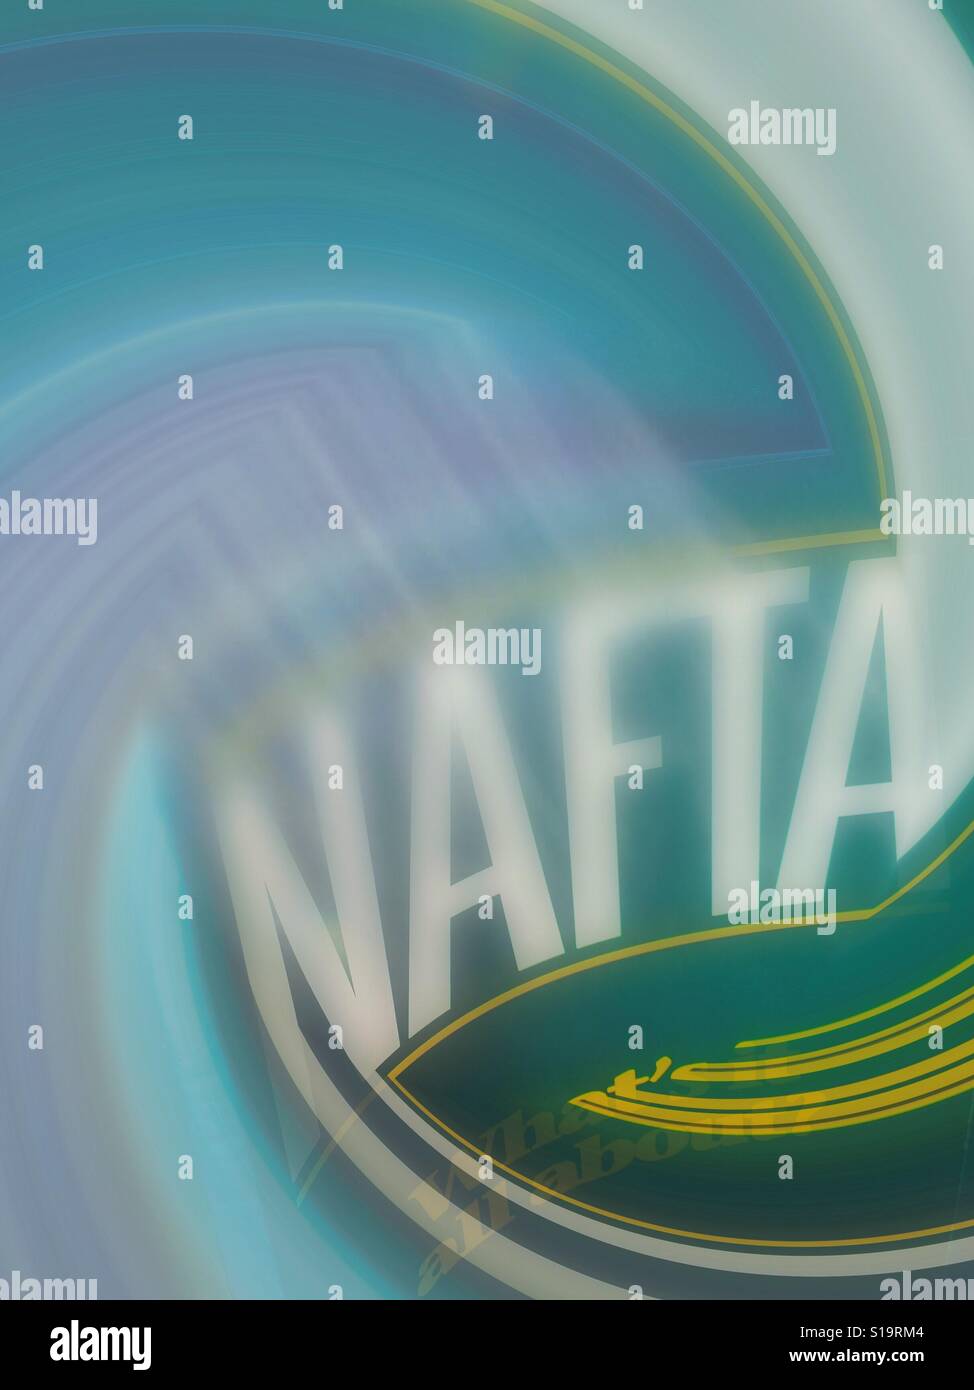 NAFTA Whirl, a graphic depiction of the turbulence in global trading relations caused by the renegotiating of NAFTA, continuing to this day. Trade flows. Stock Photo